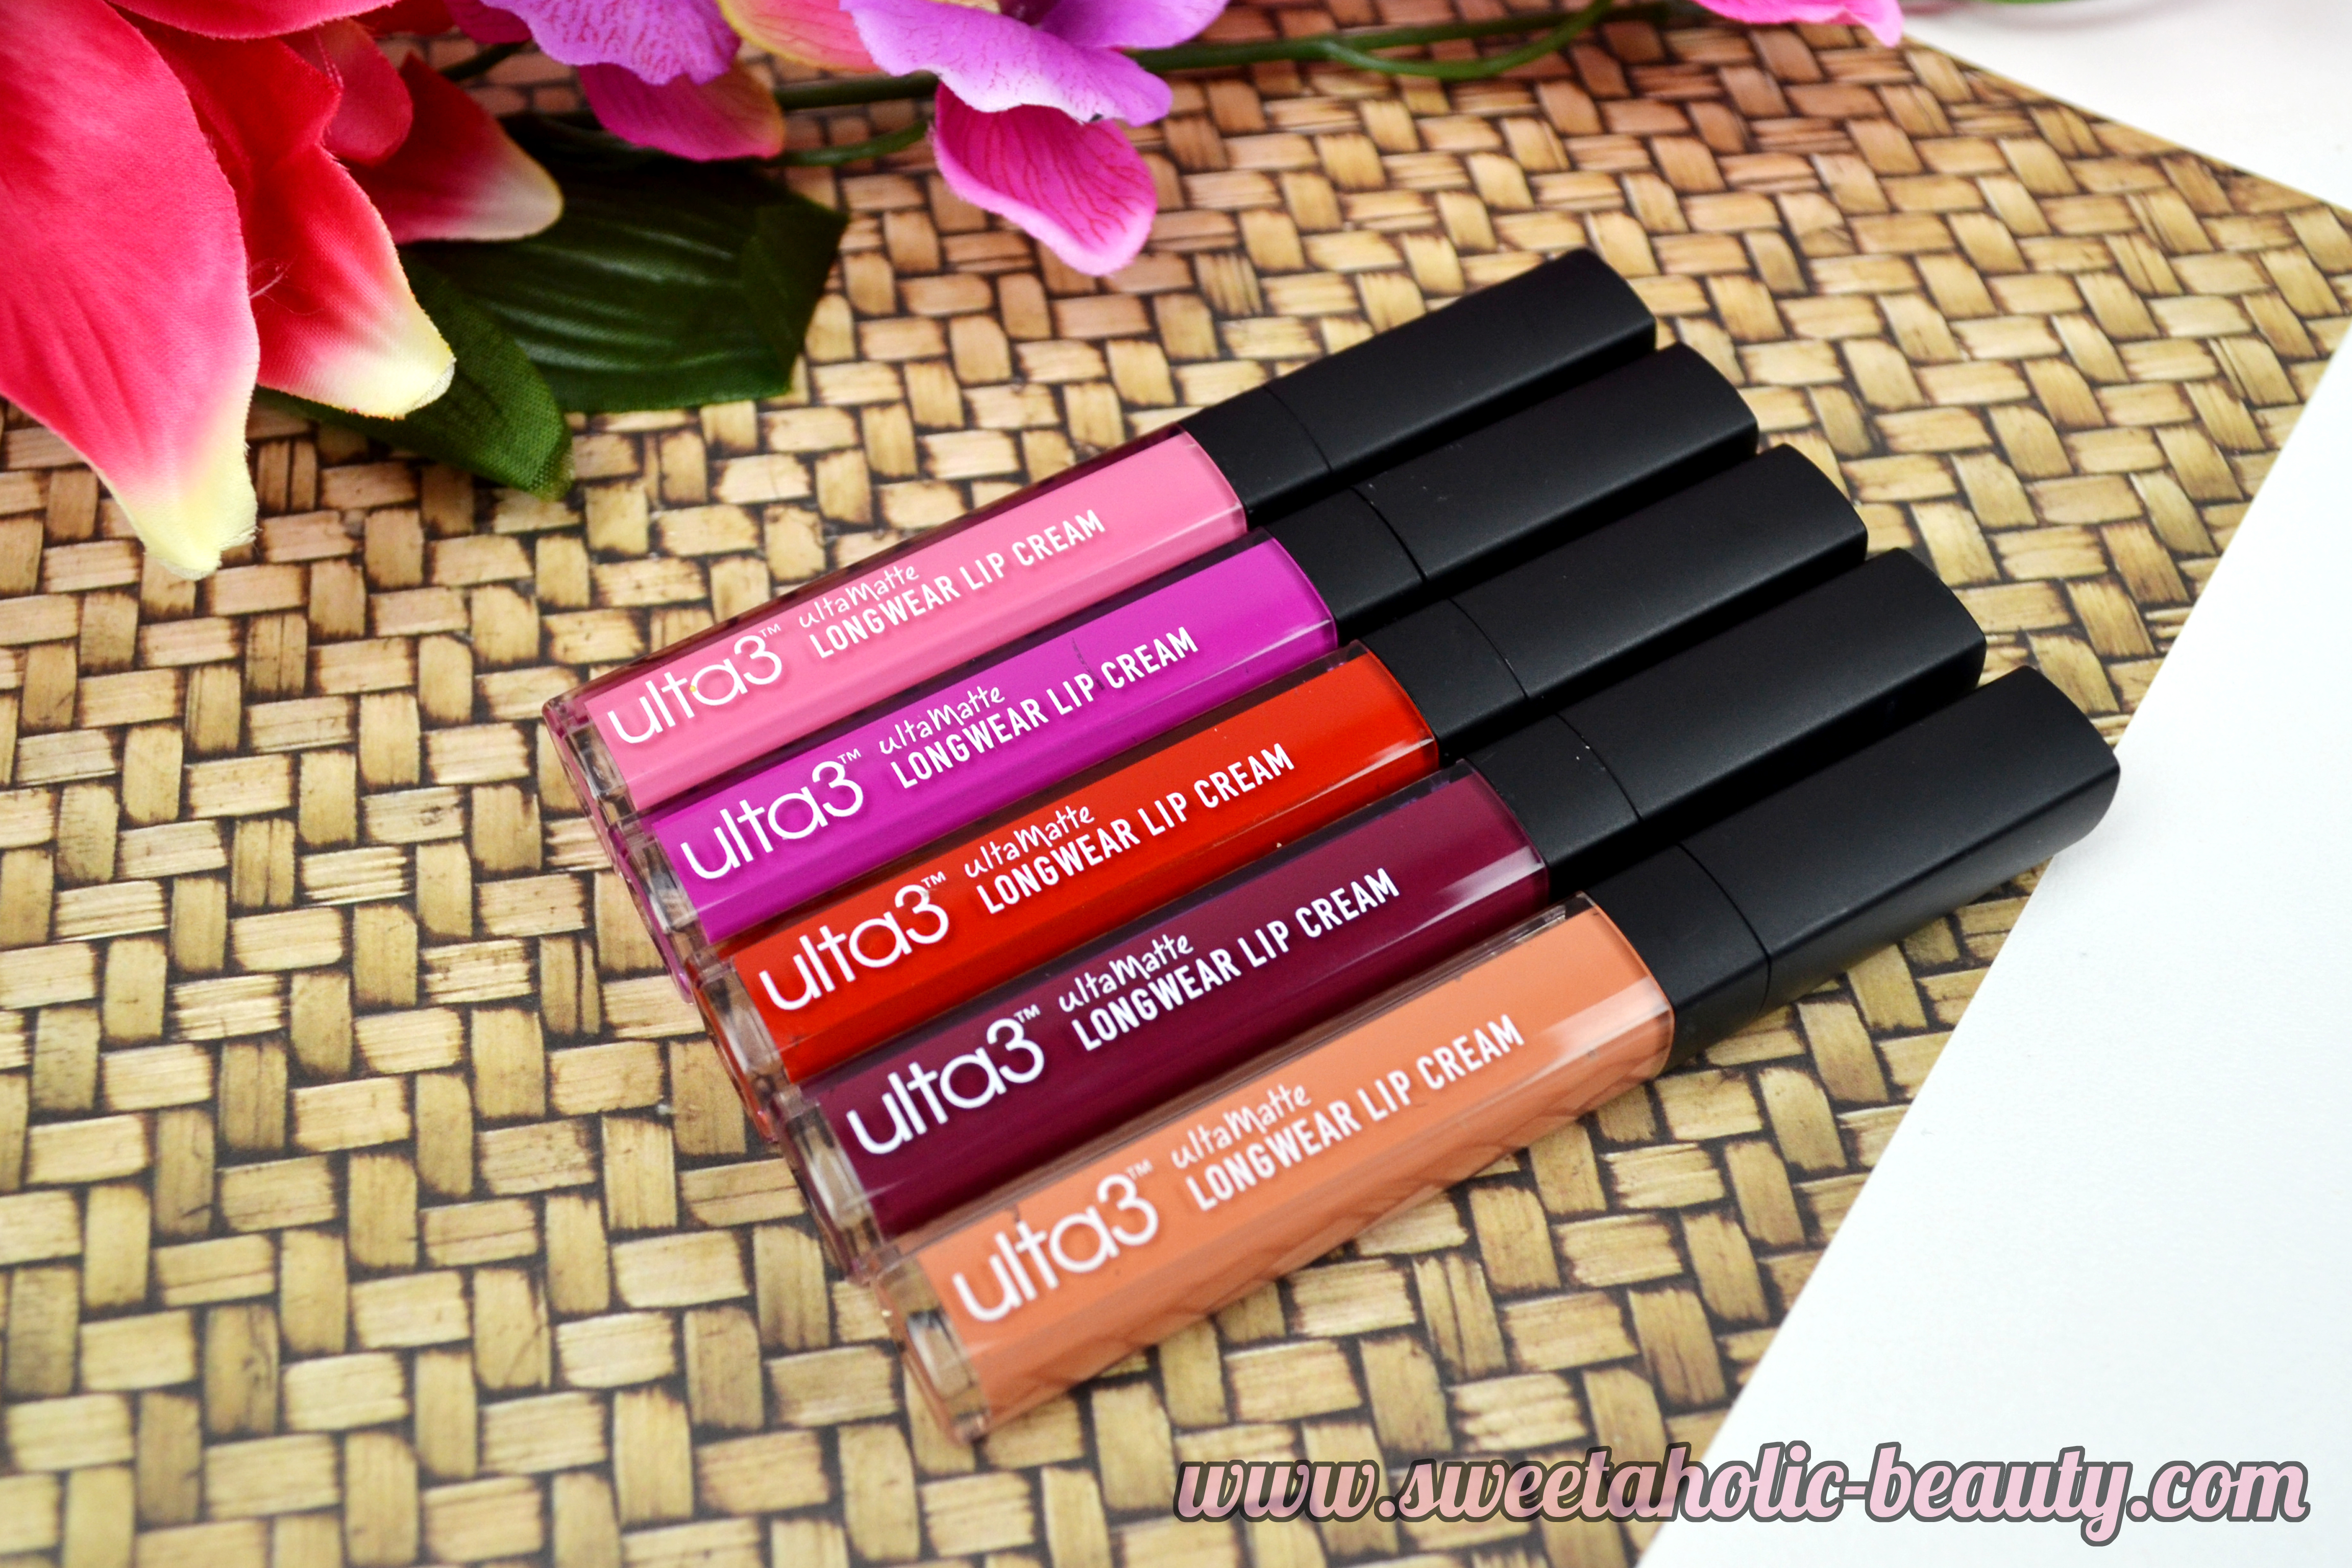 Ulta 3 Tribal Talk Collection Review & Swatches - Sweetaholic Beauty